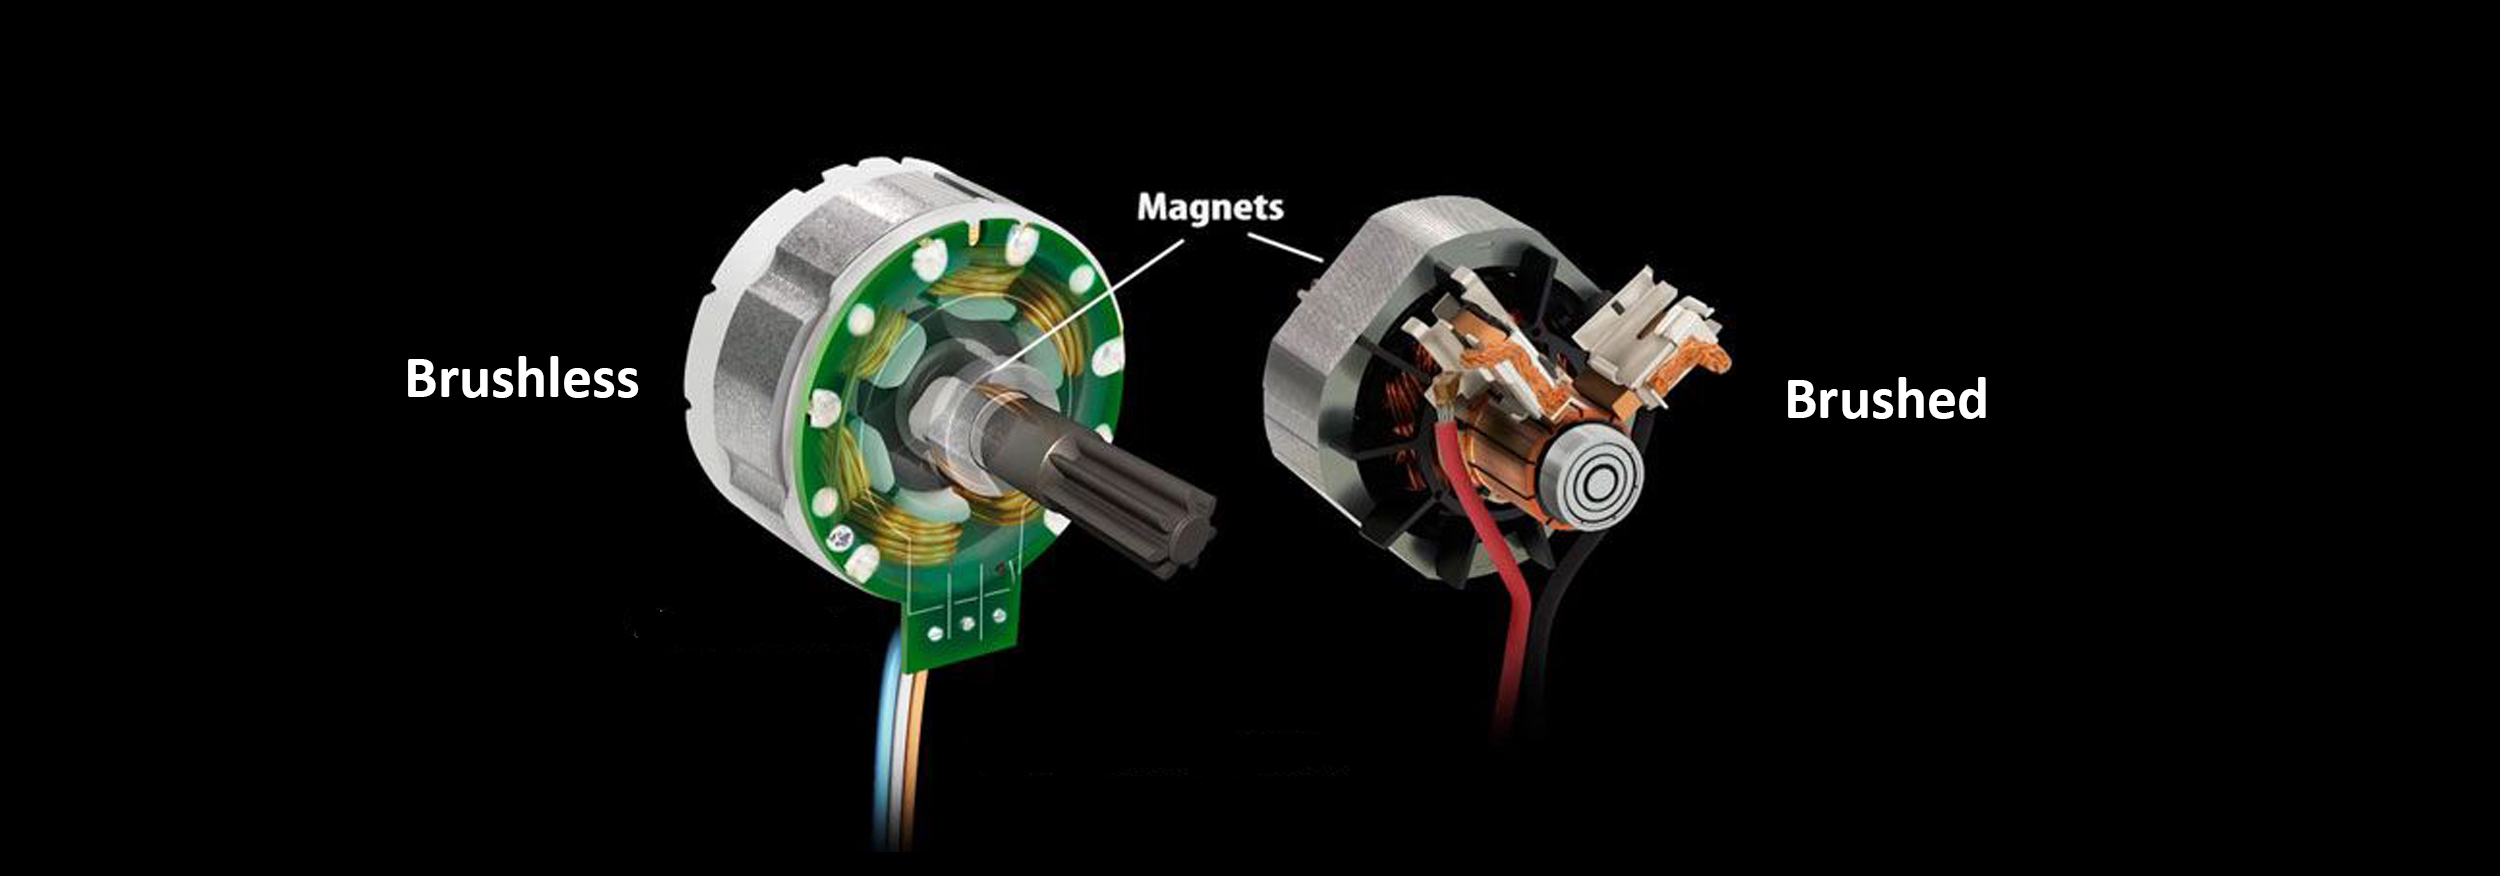 The Difference Between Brushless Motor and Brushed Motor3 The Difference Between Brushless Motor and Brushed Motor